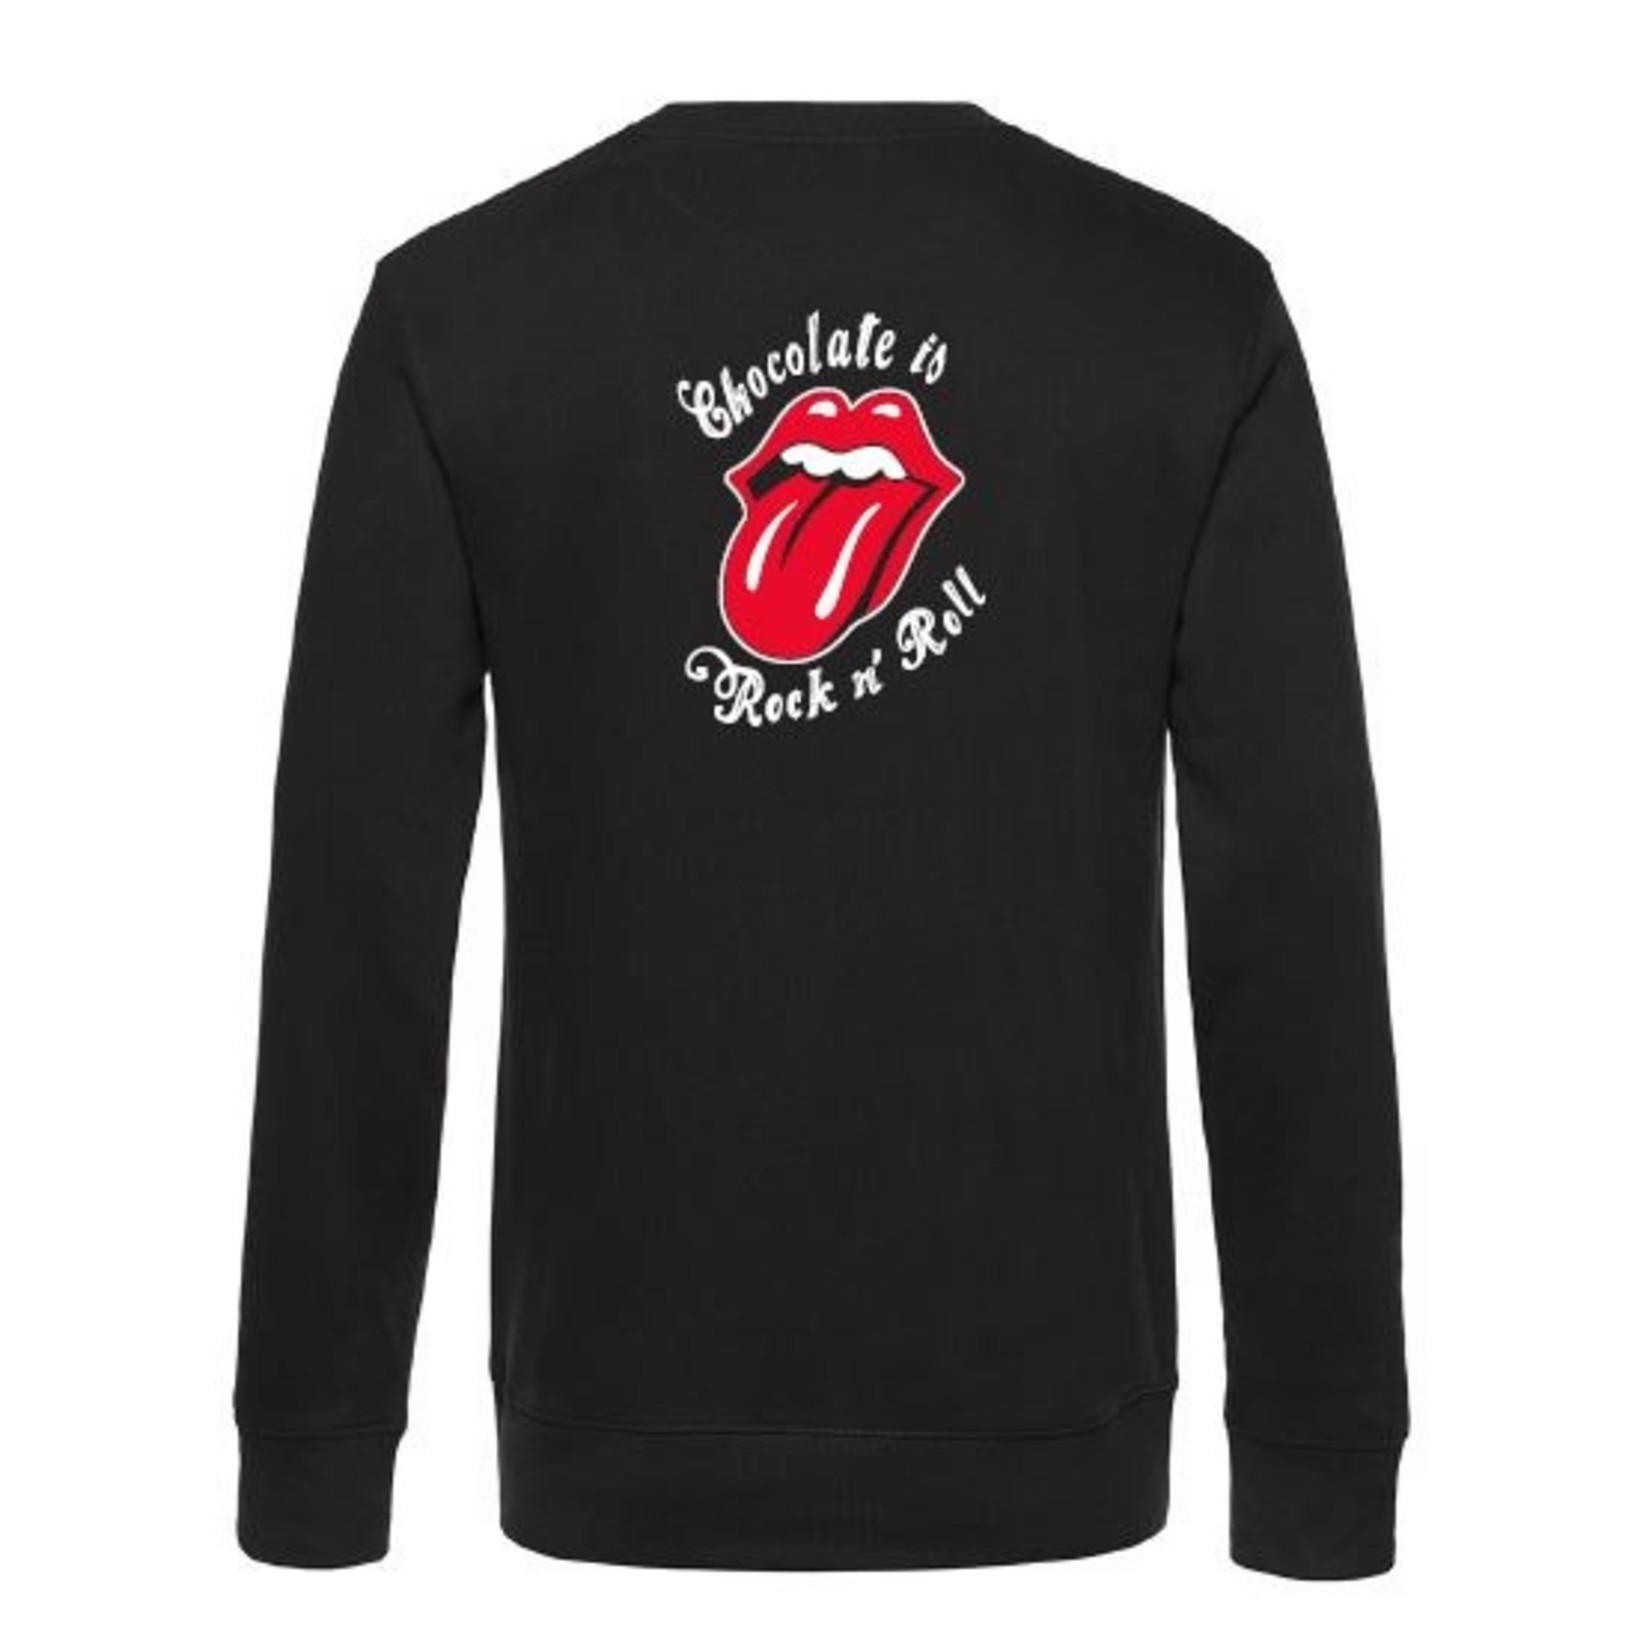 Sweater Rock n'roll tongue